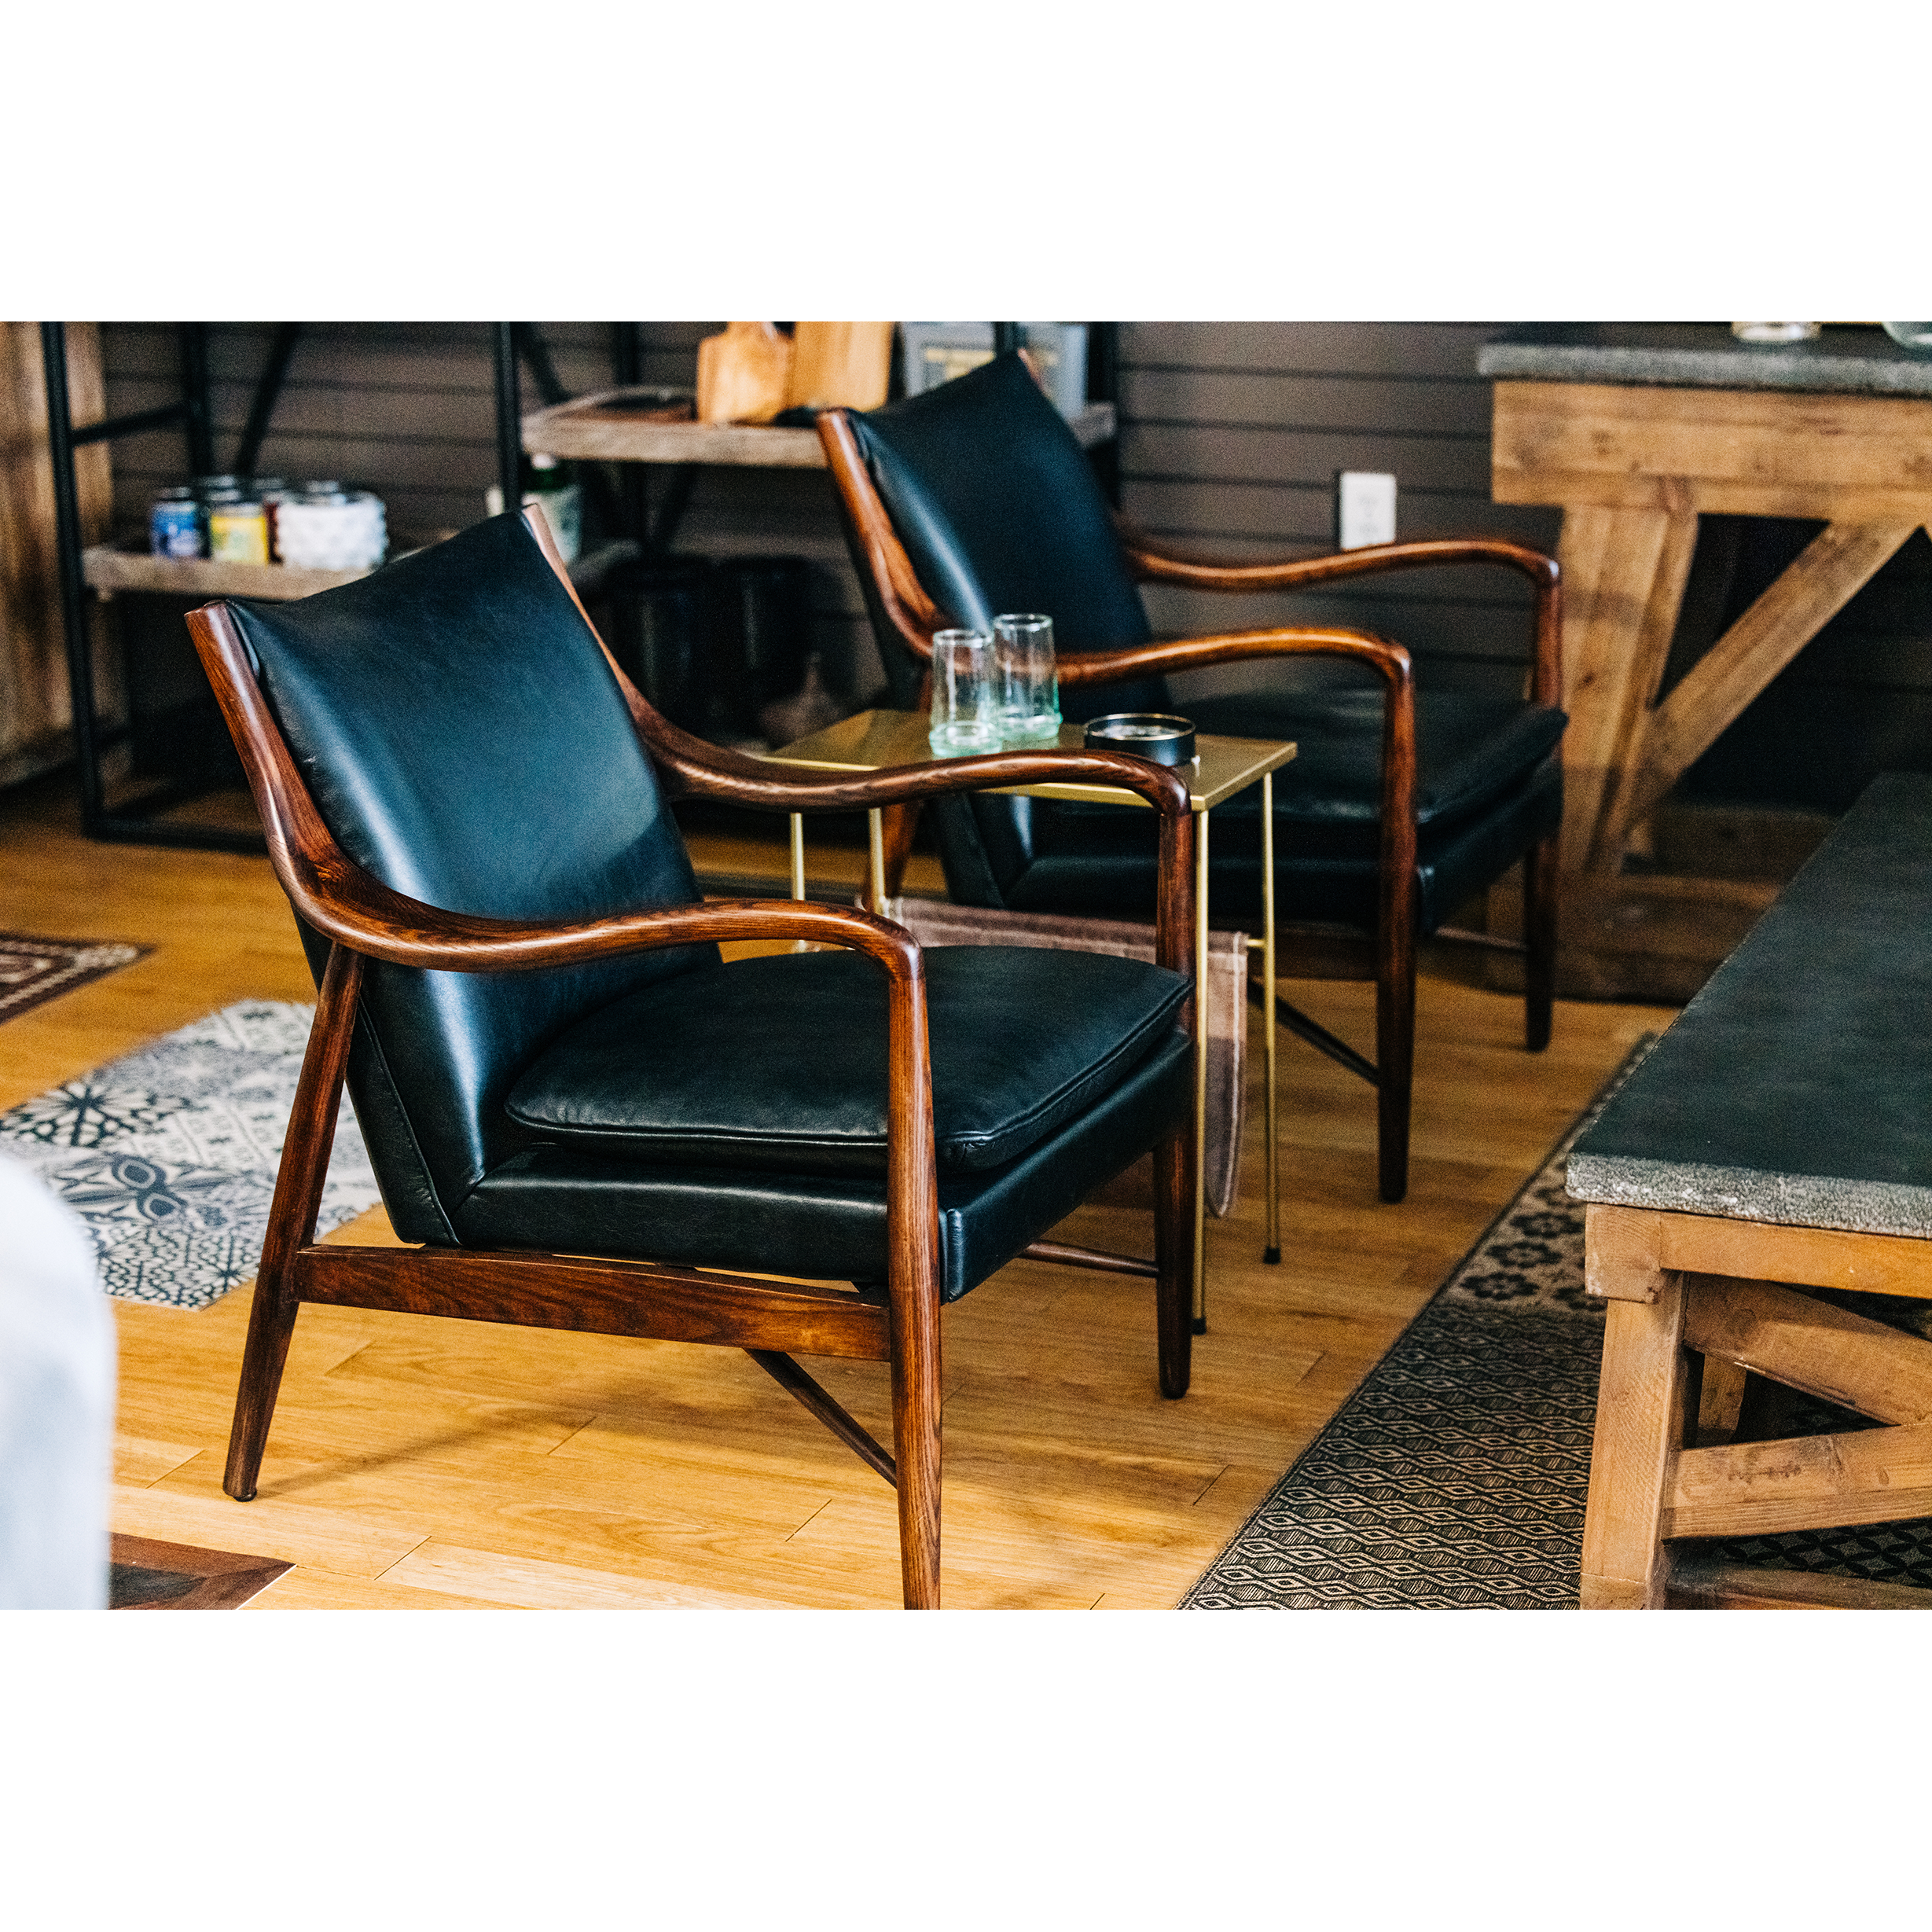 A cozy seating area features two Benson Mid-Century Leather Accent Chairs with walnut frames, positioned around a small round glass table with a beverage on top. The setting has warm wooden flooring and a rustic ambiance.